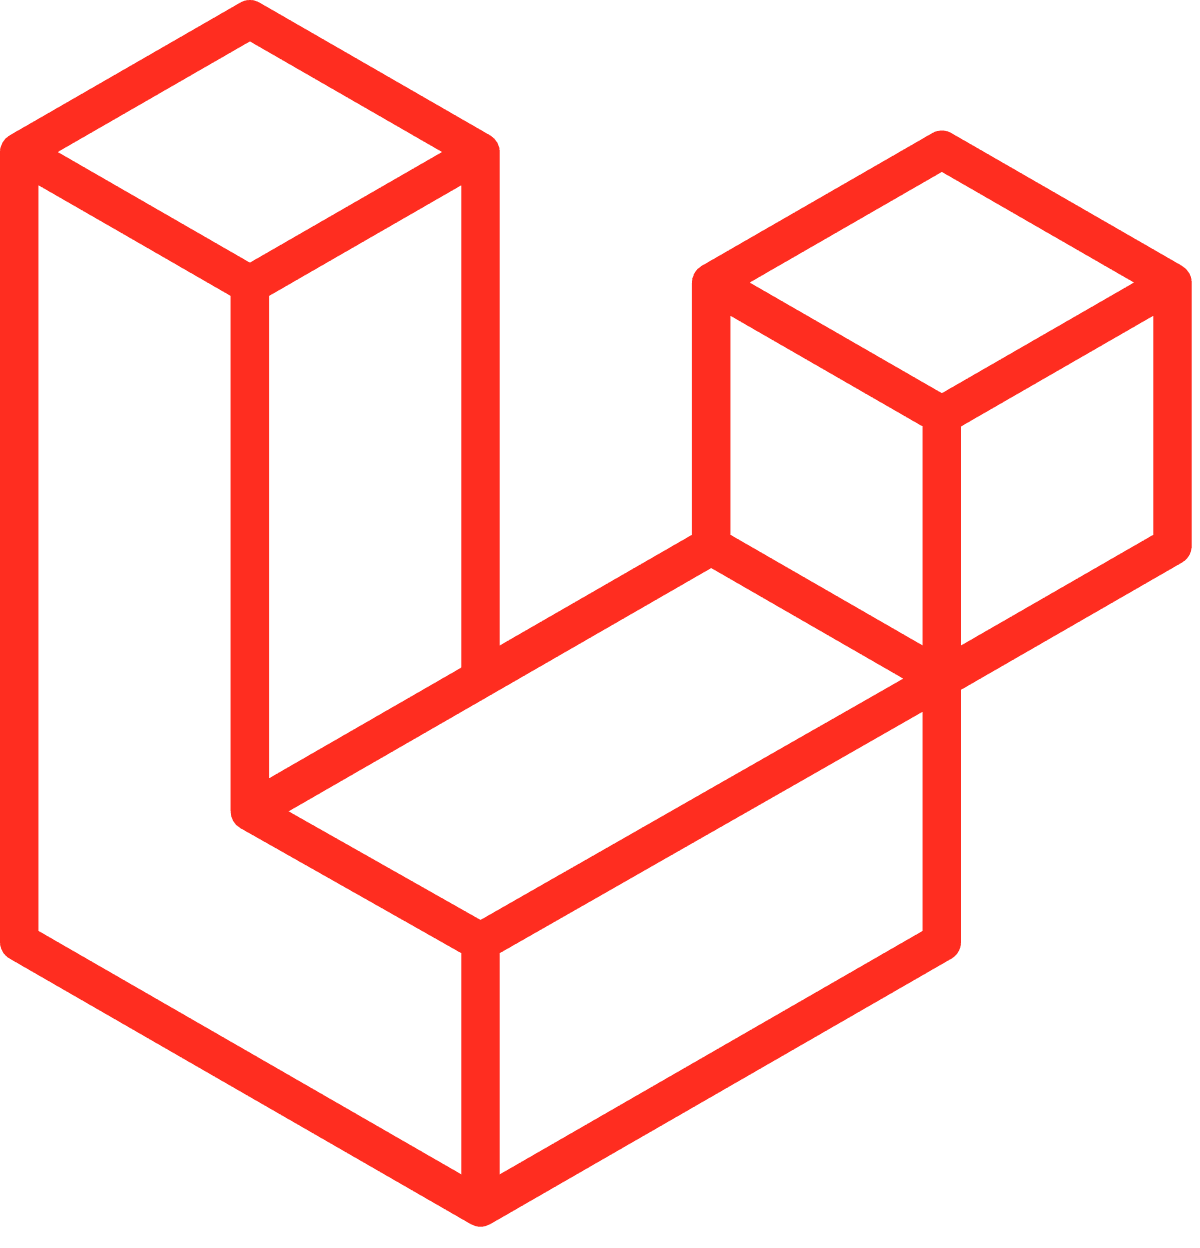 Empowering clients with Laravel